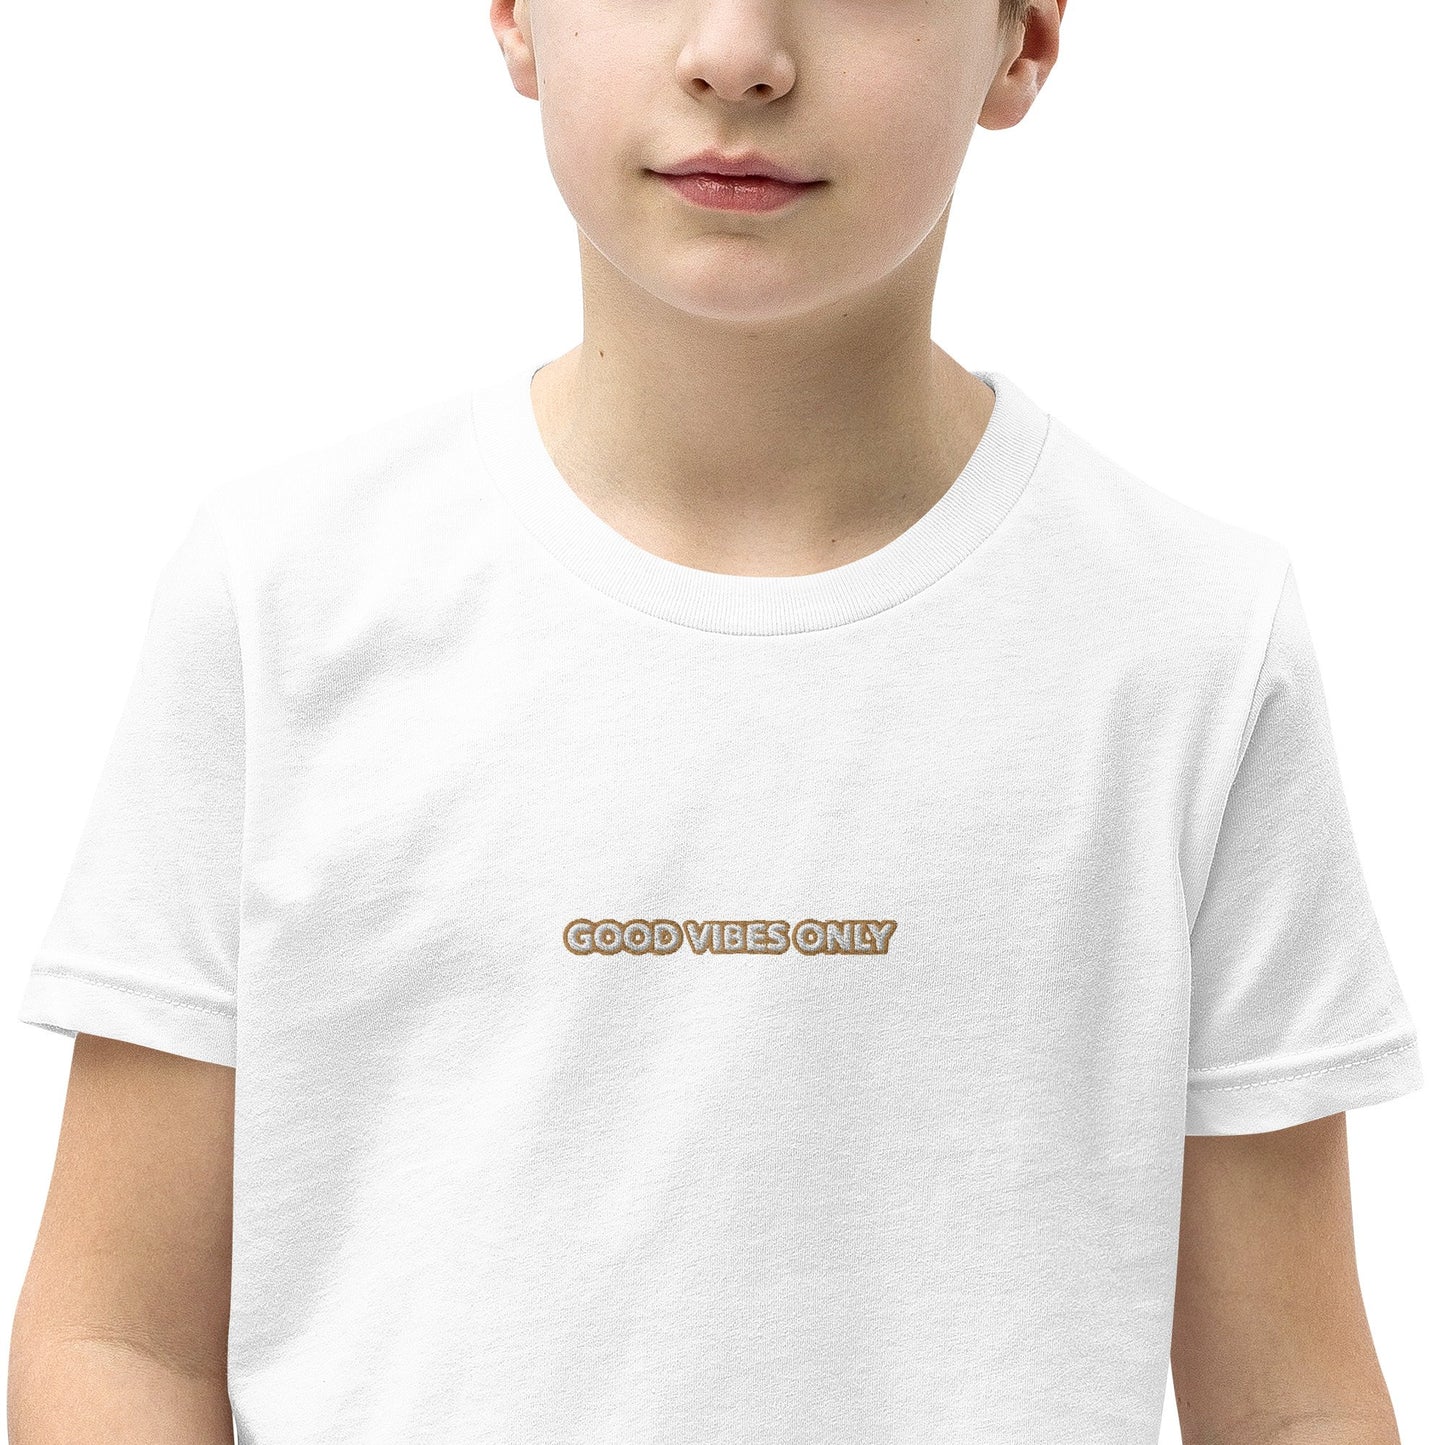 GOOD VIBES ONLY - Unisex Youth Short Sleeve T-Shirt